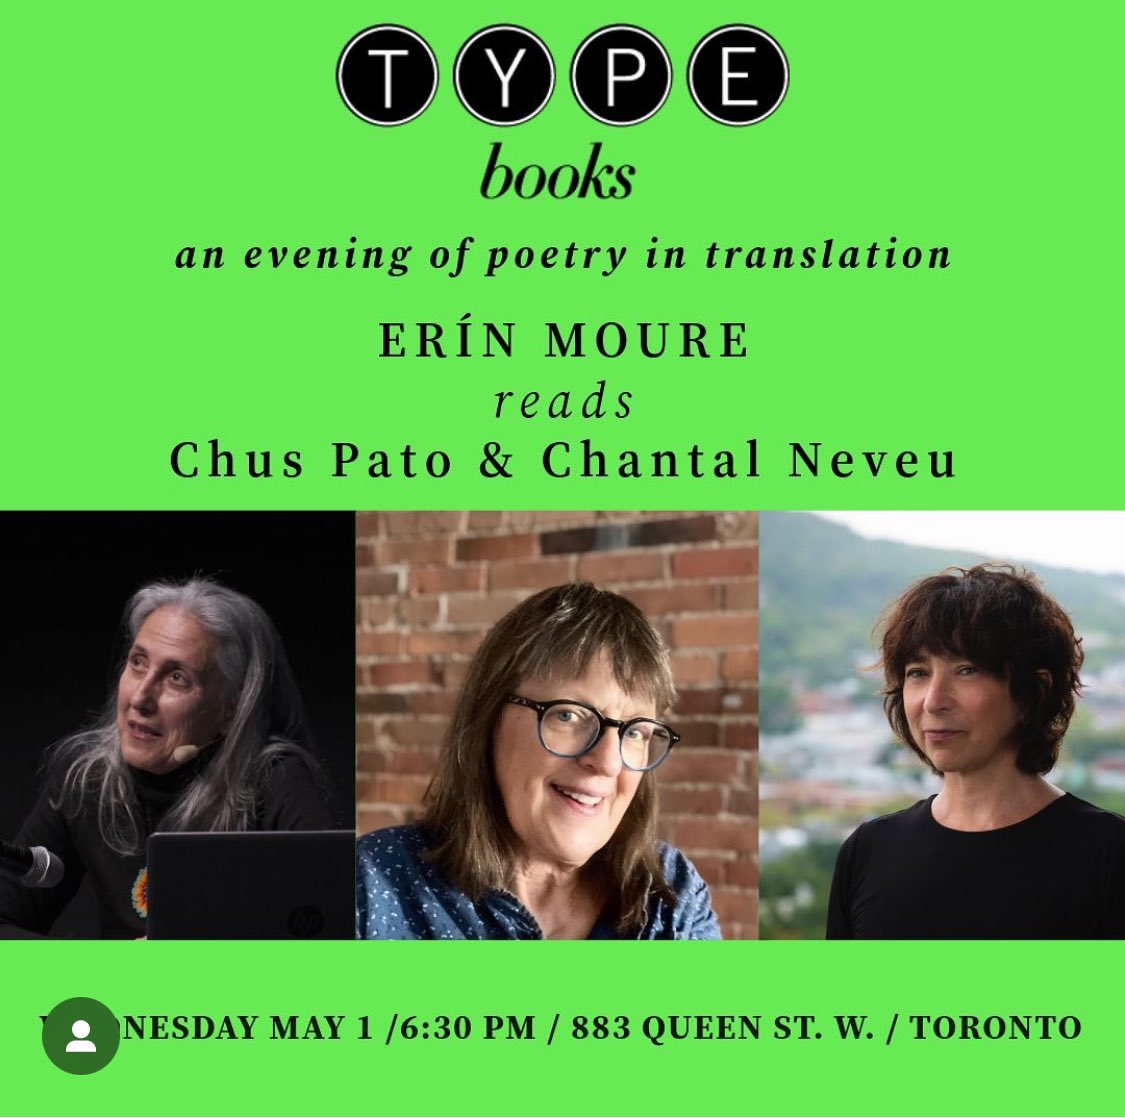 May 1 at @typebooks in Toronto! Chatting on, & reading from, my two most recent poetry translations, from Galician & French into 100% Canadian English! #internationalpoetry #galicianpoetry #québecpoésie #crossingborders #poetrypassport #poetrycommunity #sharepoetry #poetrythinks